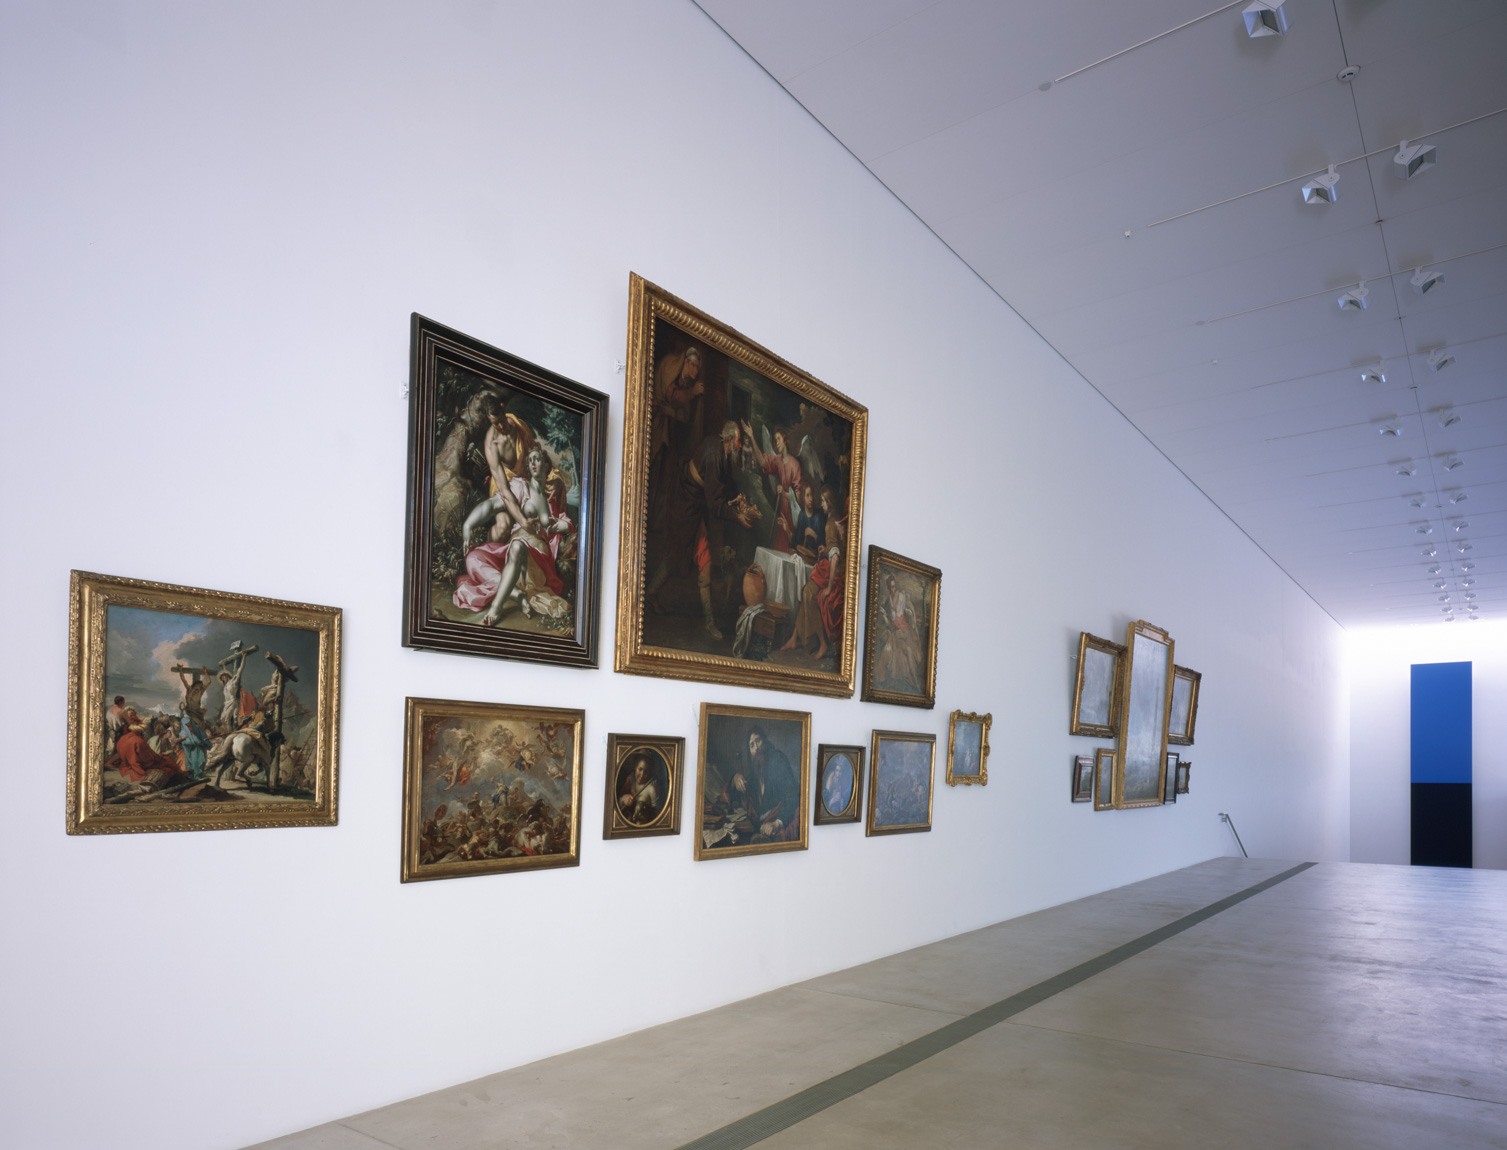 Two groups of paintings hang salon-style in the Main Gallery.